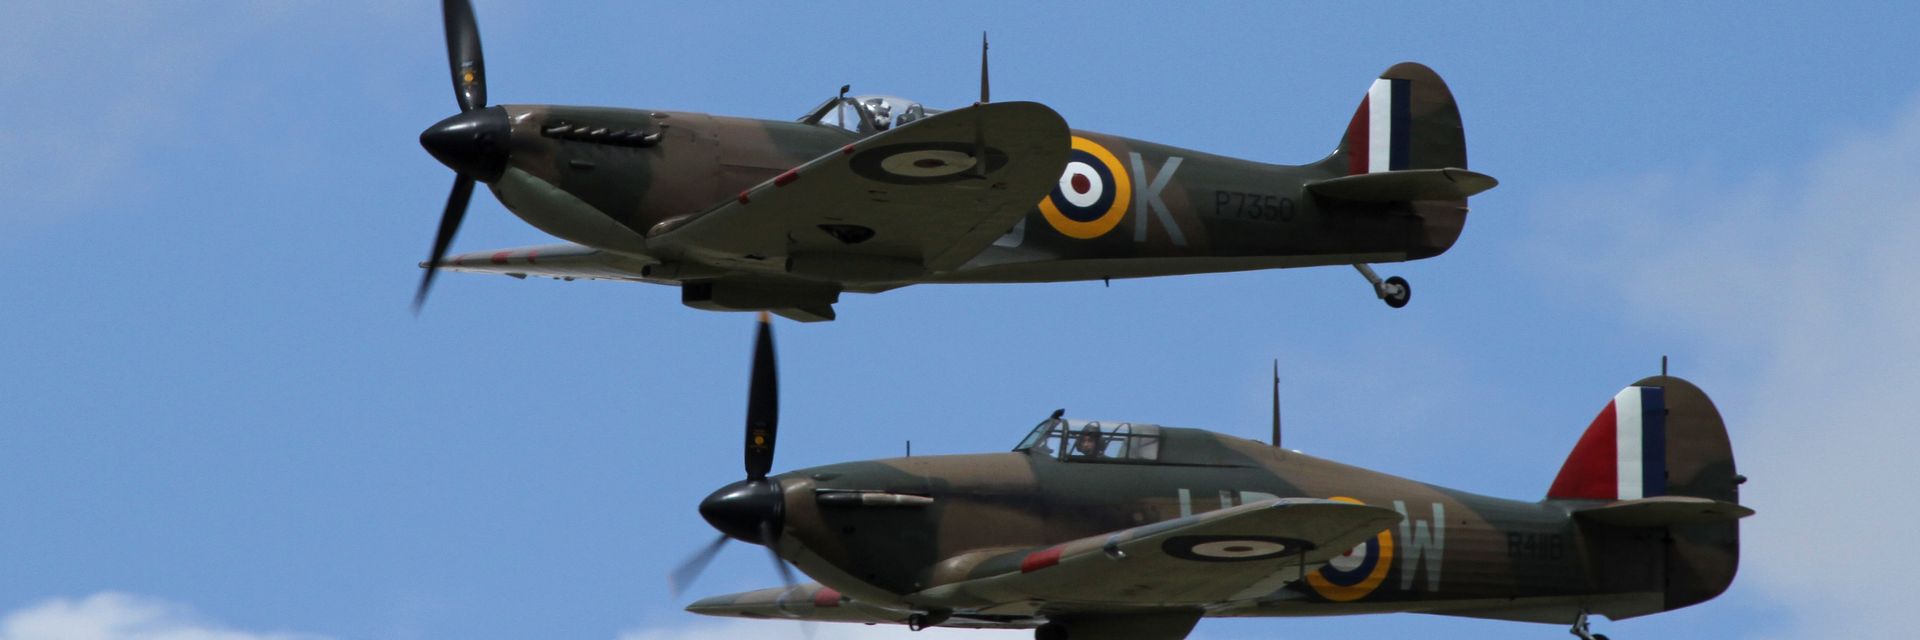 Spitfire &#38; Hurricane&#58; The Fighter Planes that Won the Battle of Britain